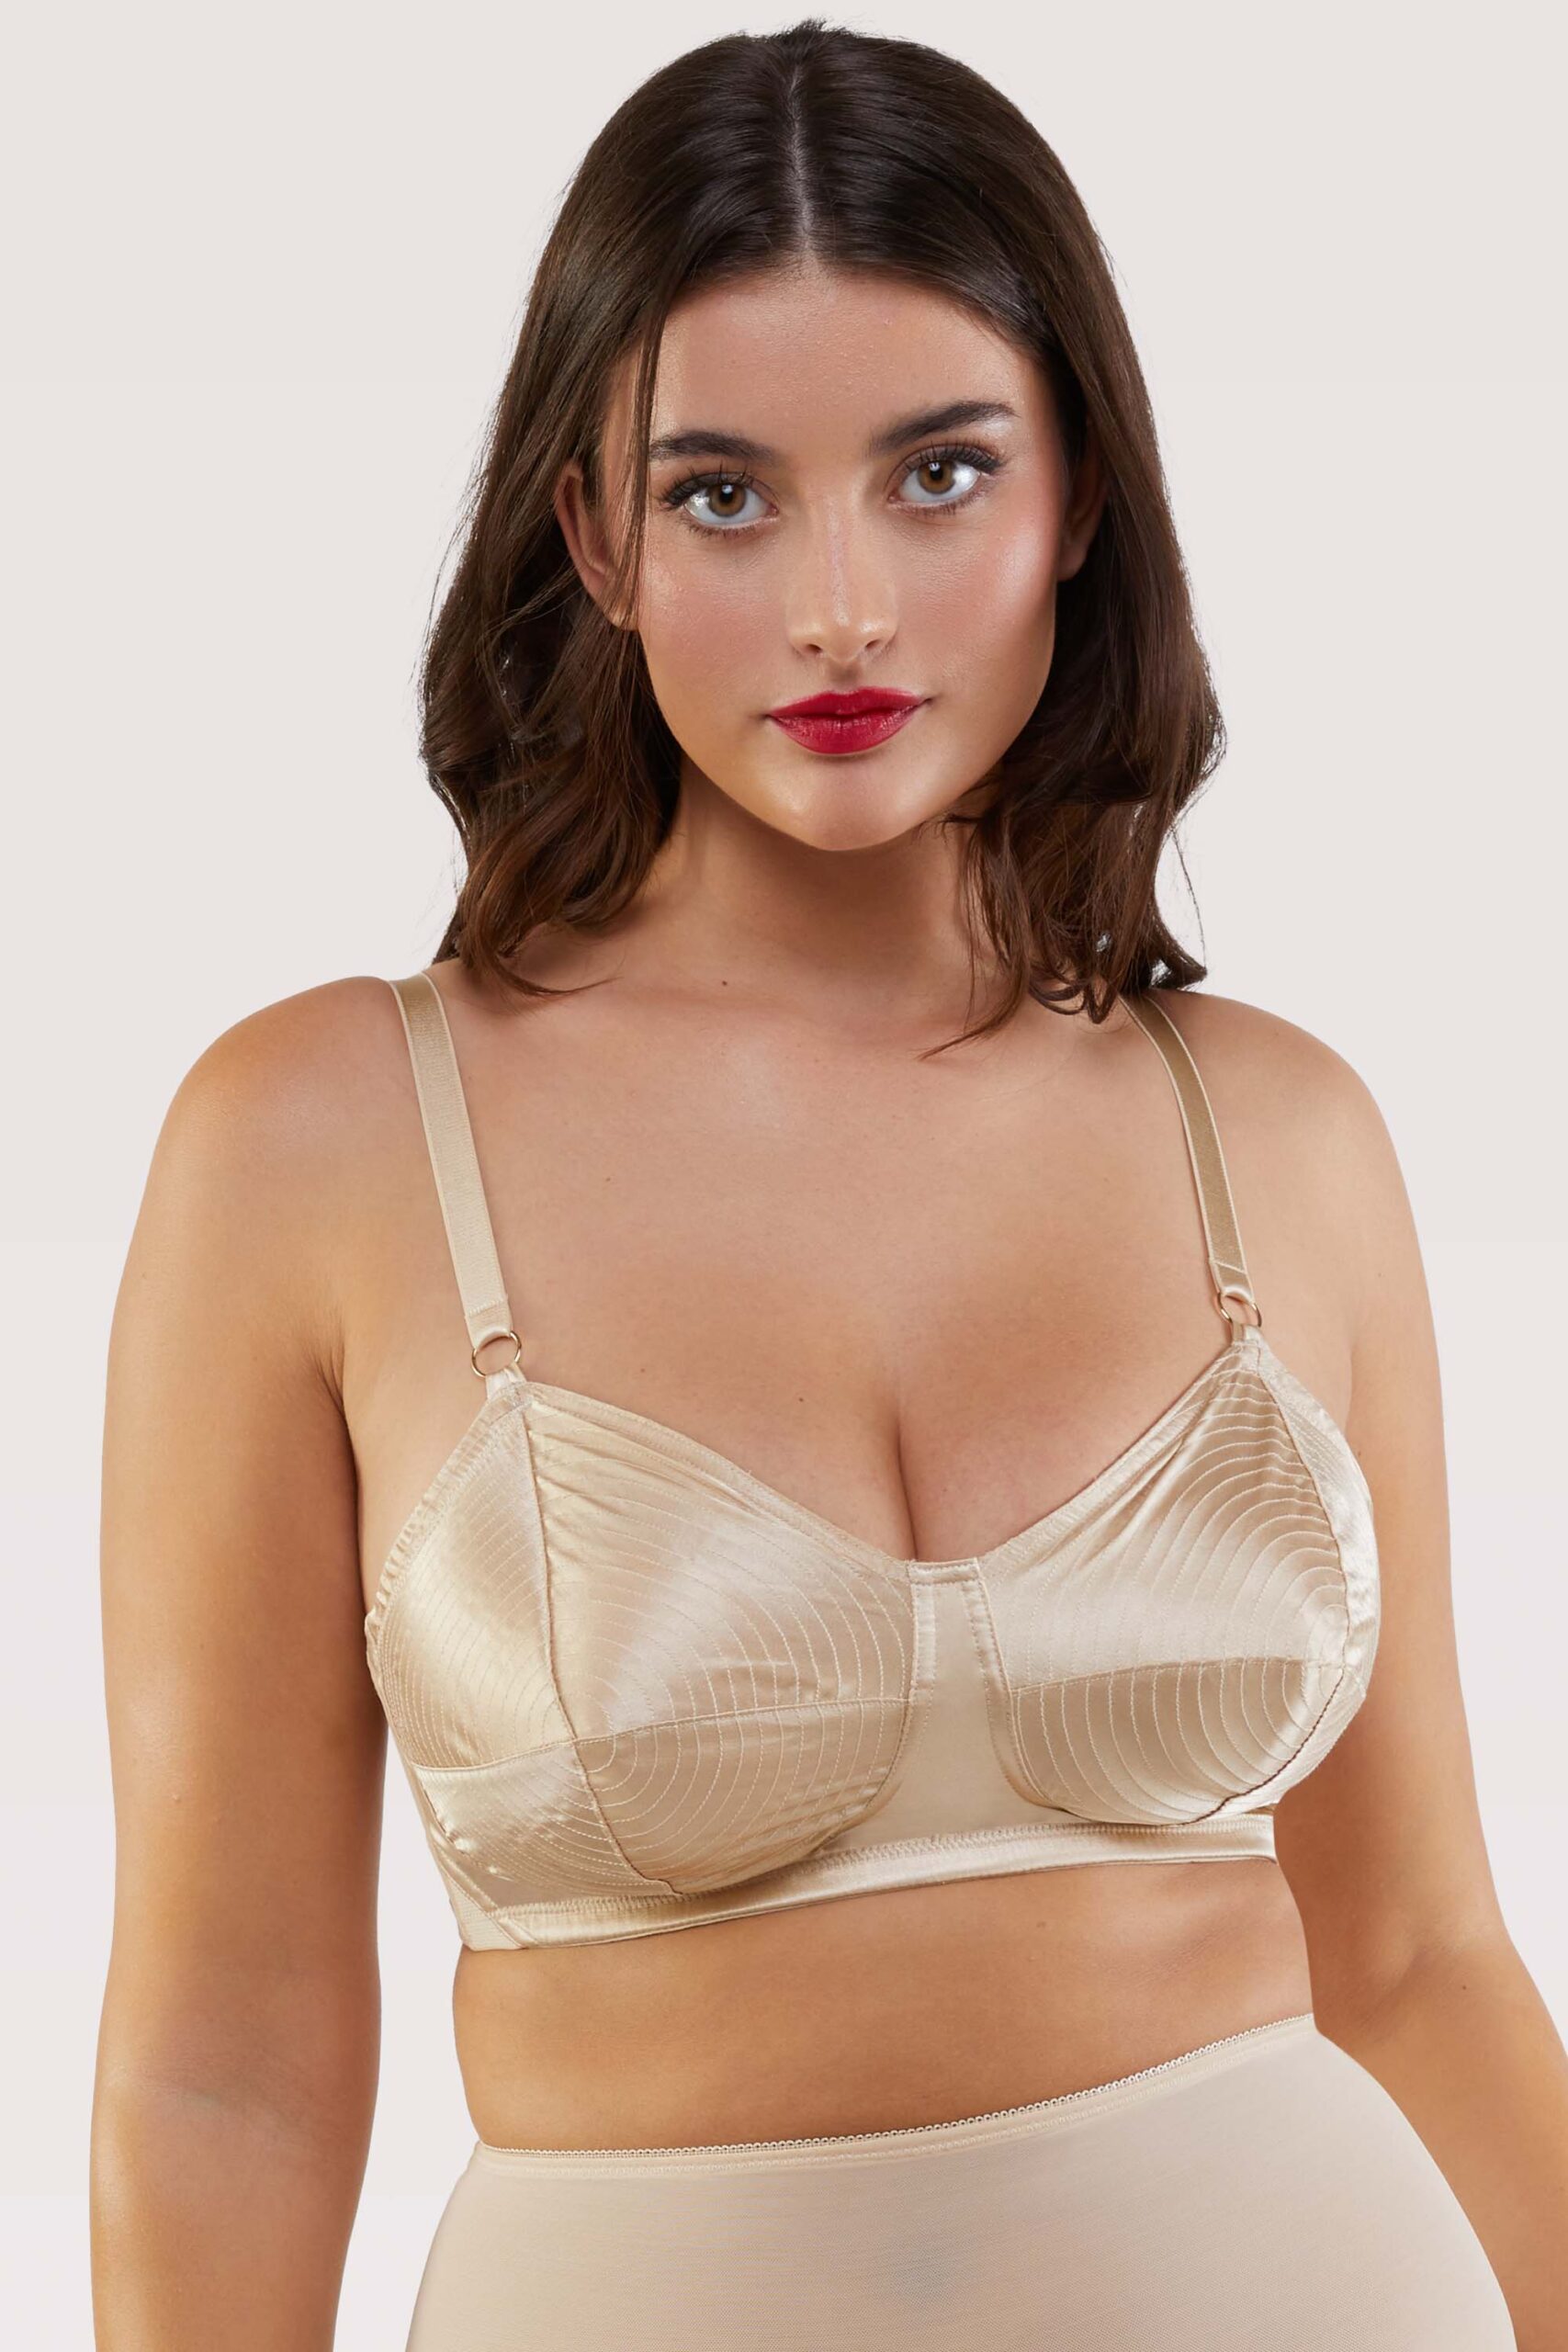 Does My Bullet Bra Fit? 